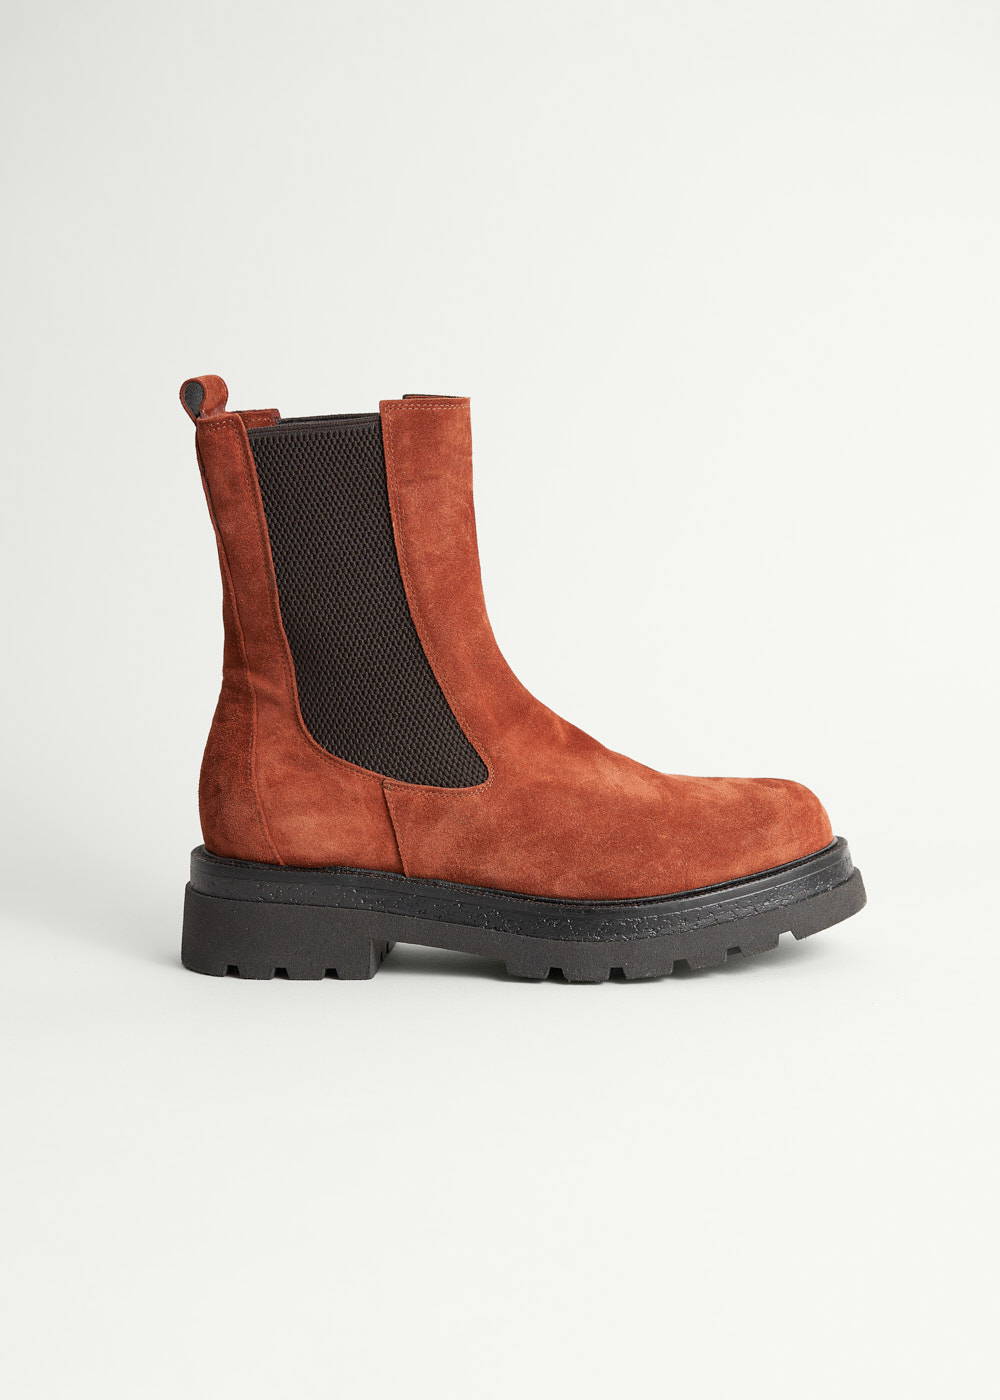 A pair of rust suede chelsea boots